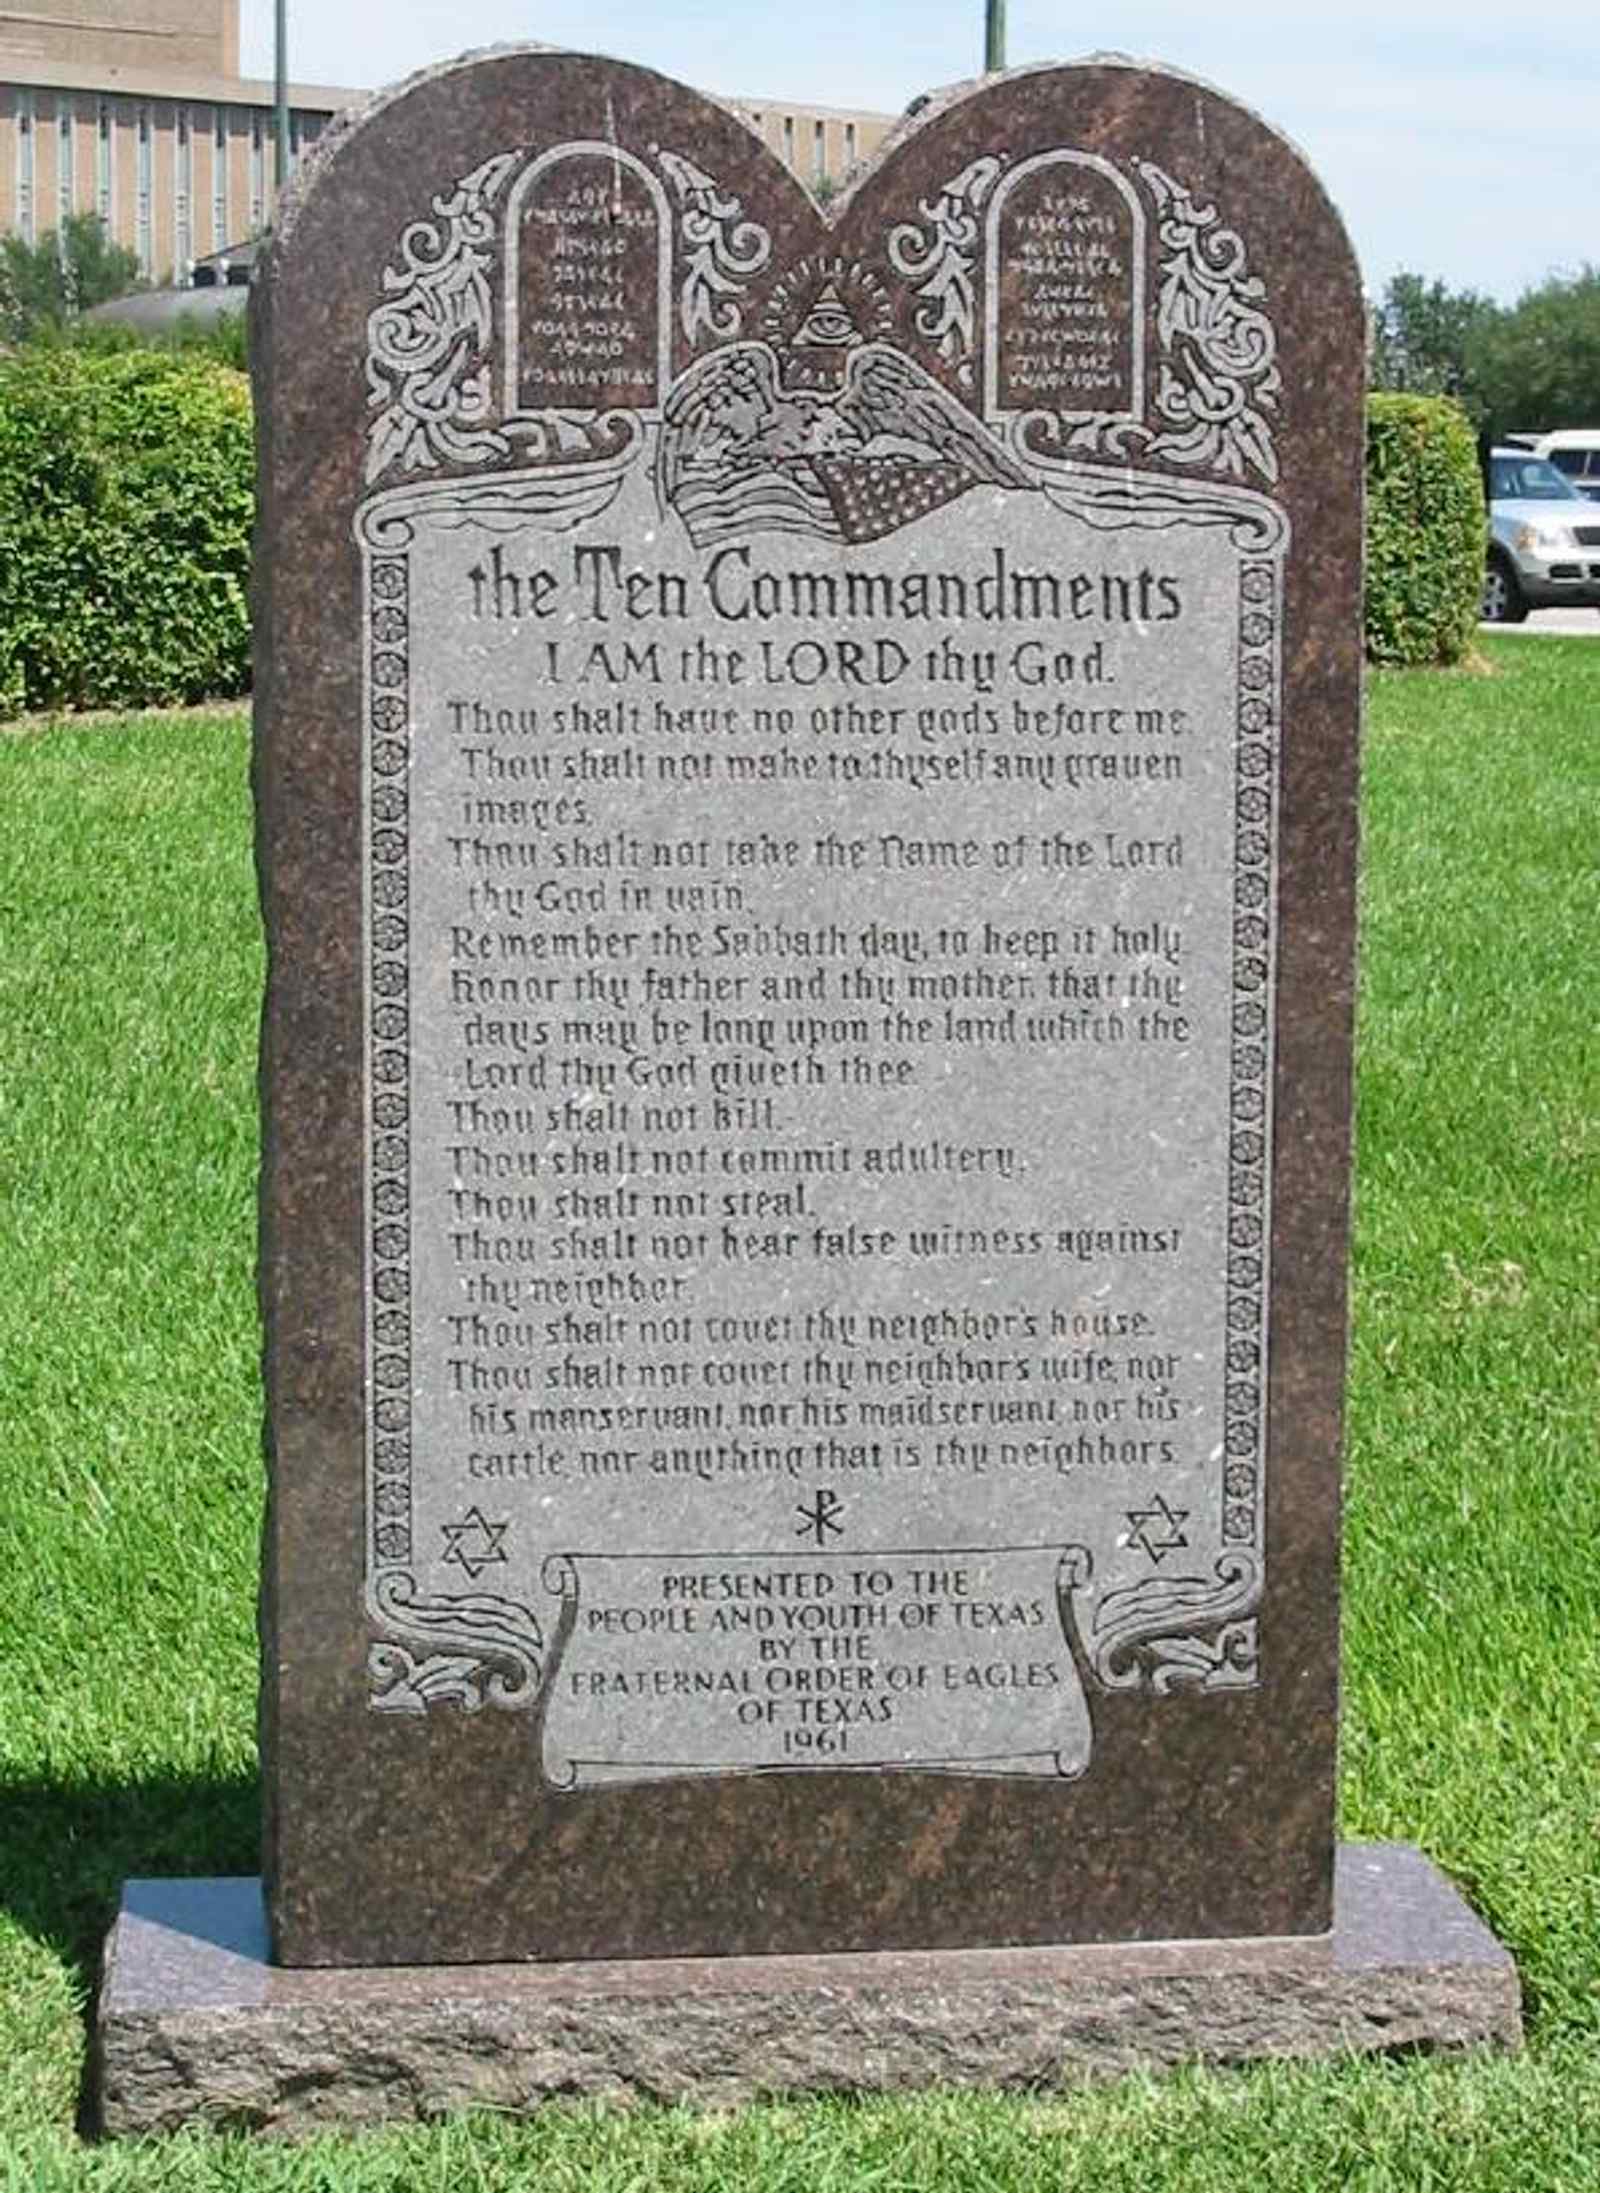 The Ten Commandments: A Dialogue for Humanists and Christians